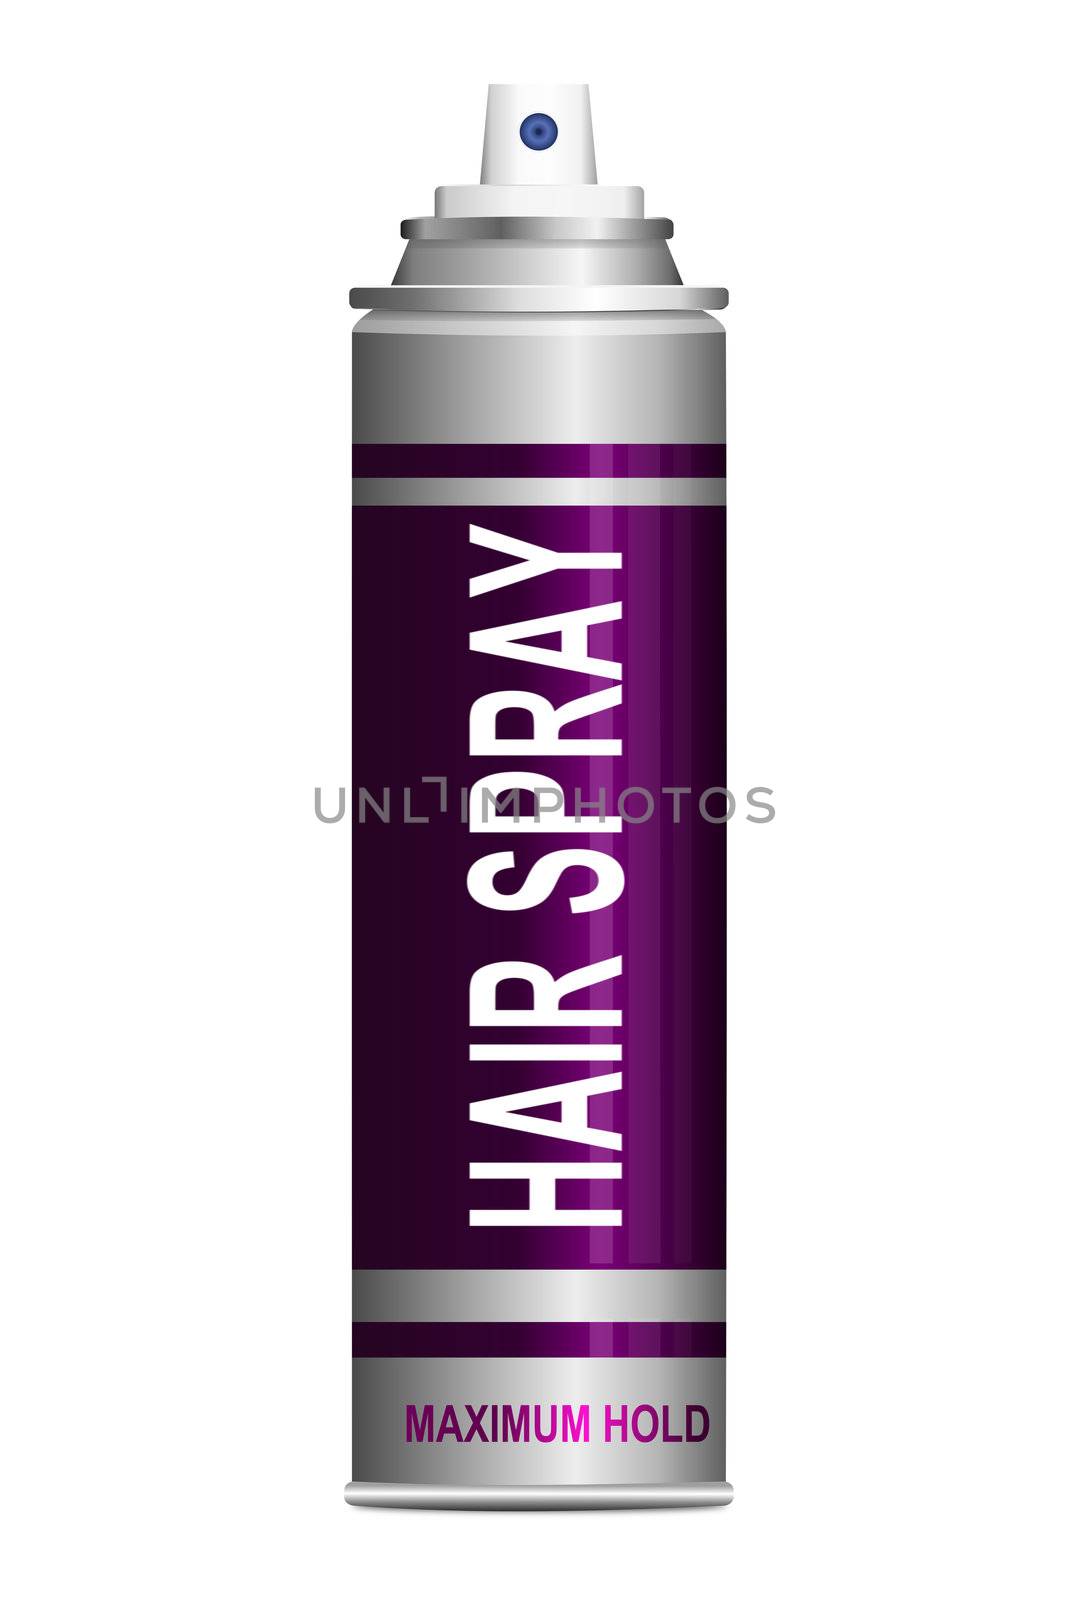 Illustration depicting a single hair spray aerosol can arranged over white.